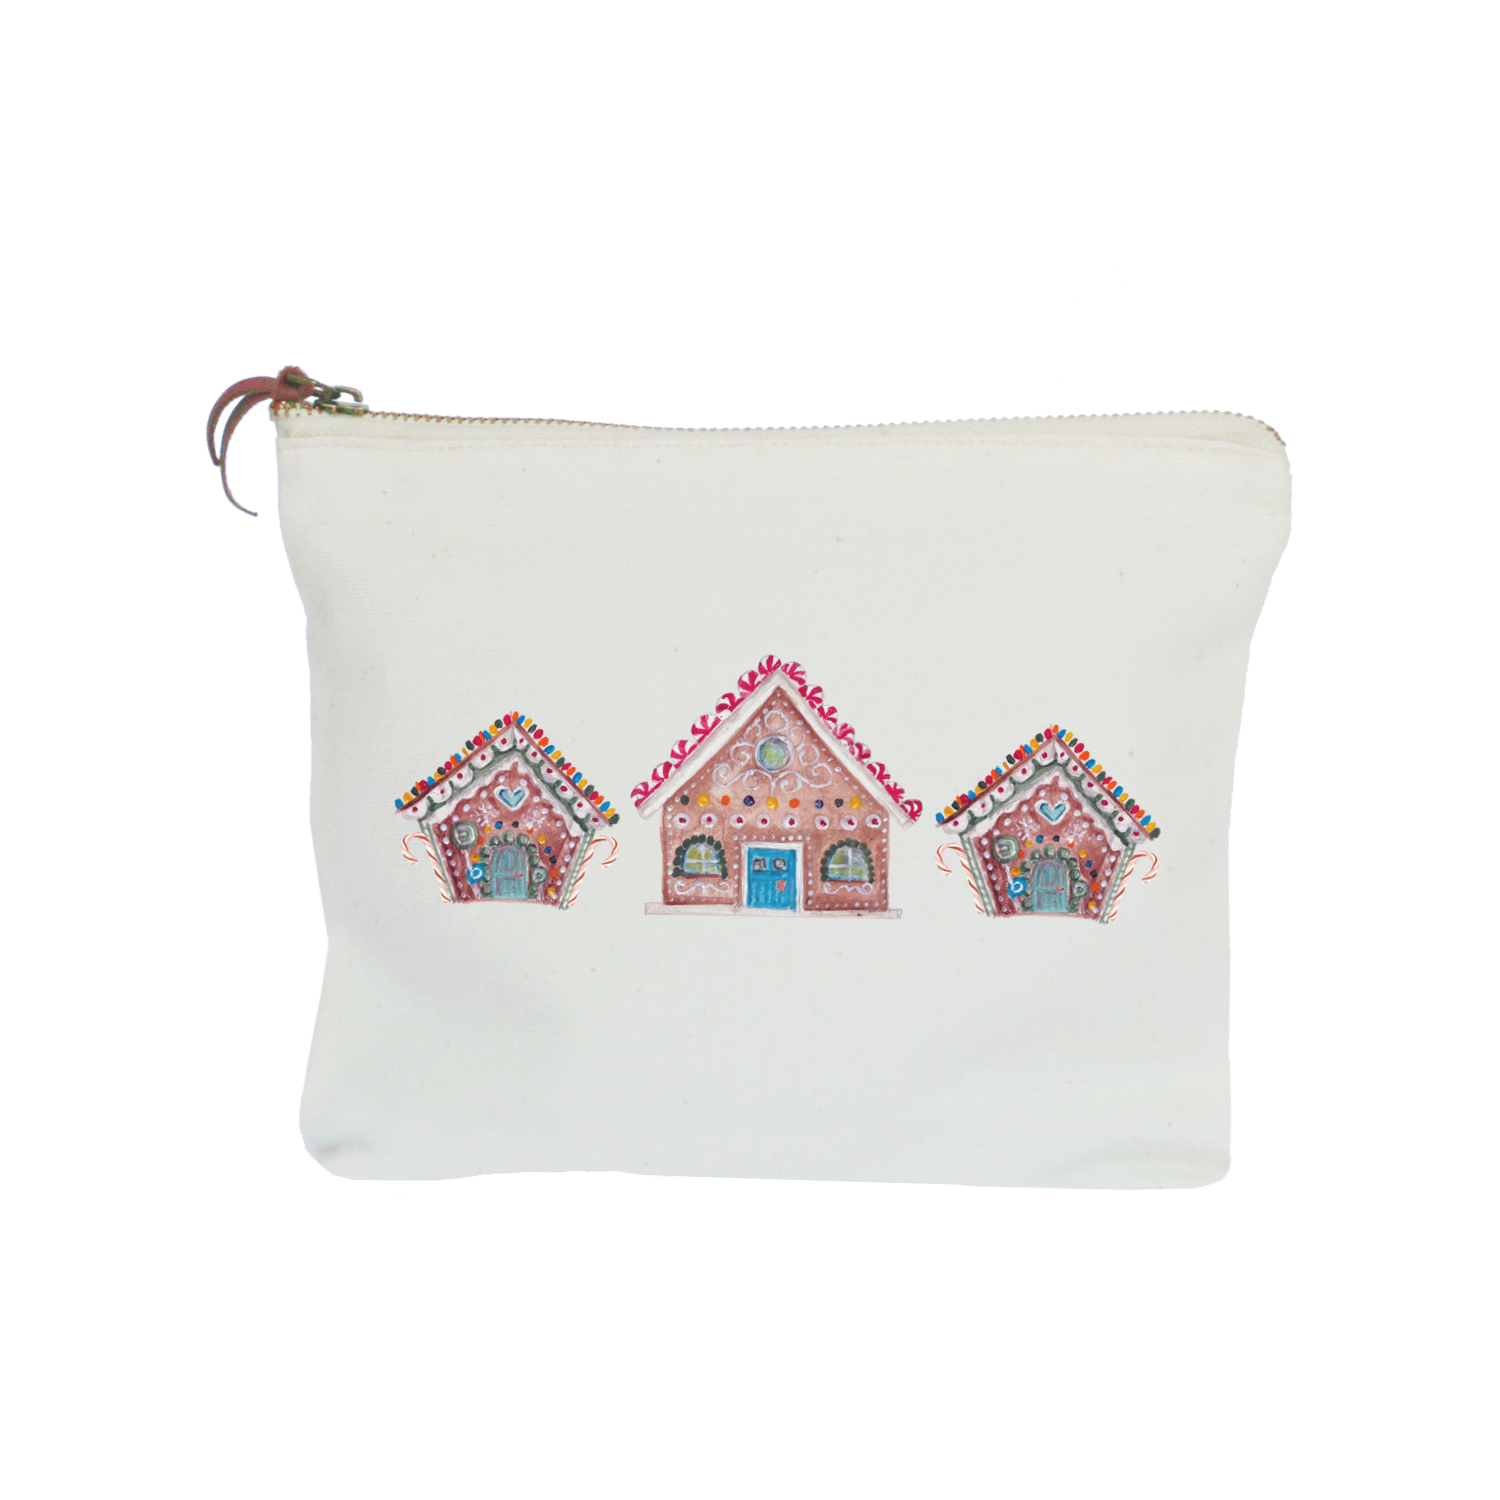 three gingerbread houses zipper pouch